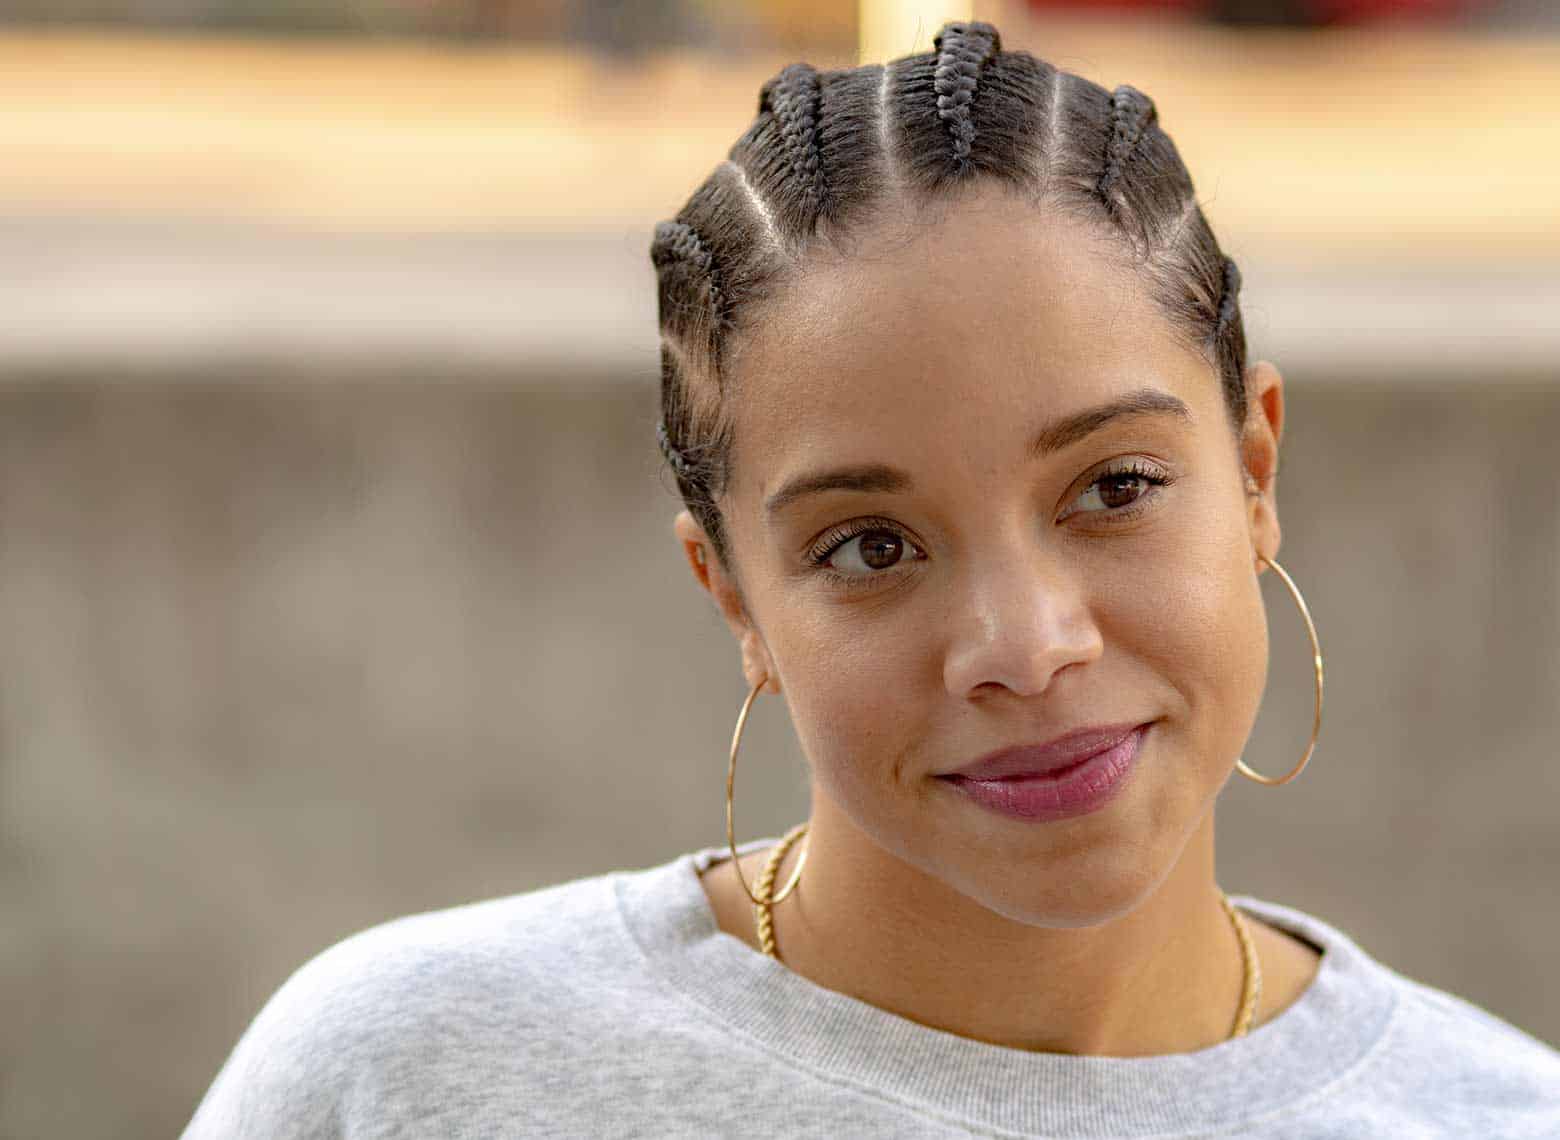 person with cornrows wearing a light gray sweater, big gold hoop earrings, and light berry-colored lipstick